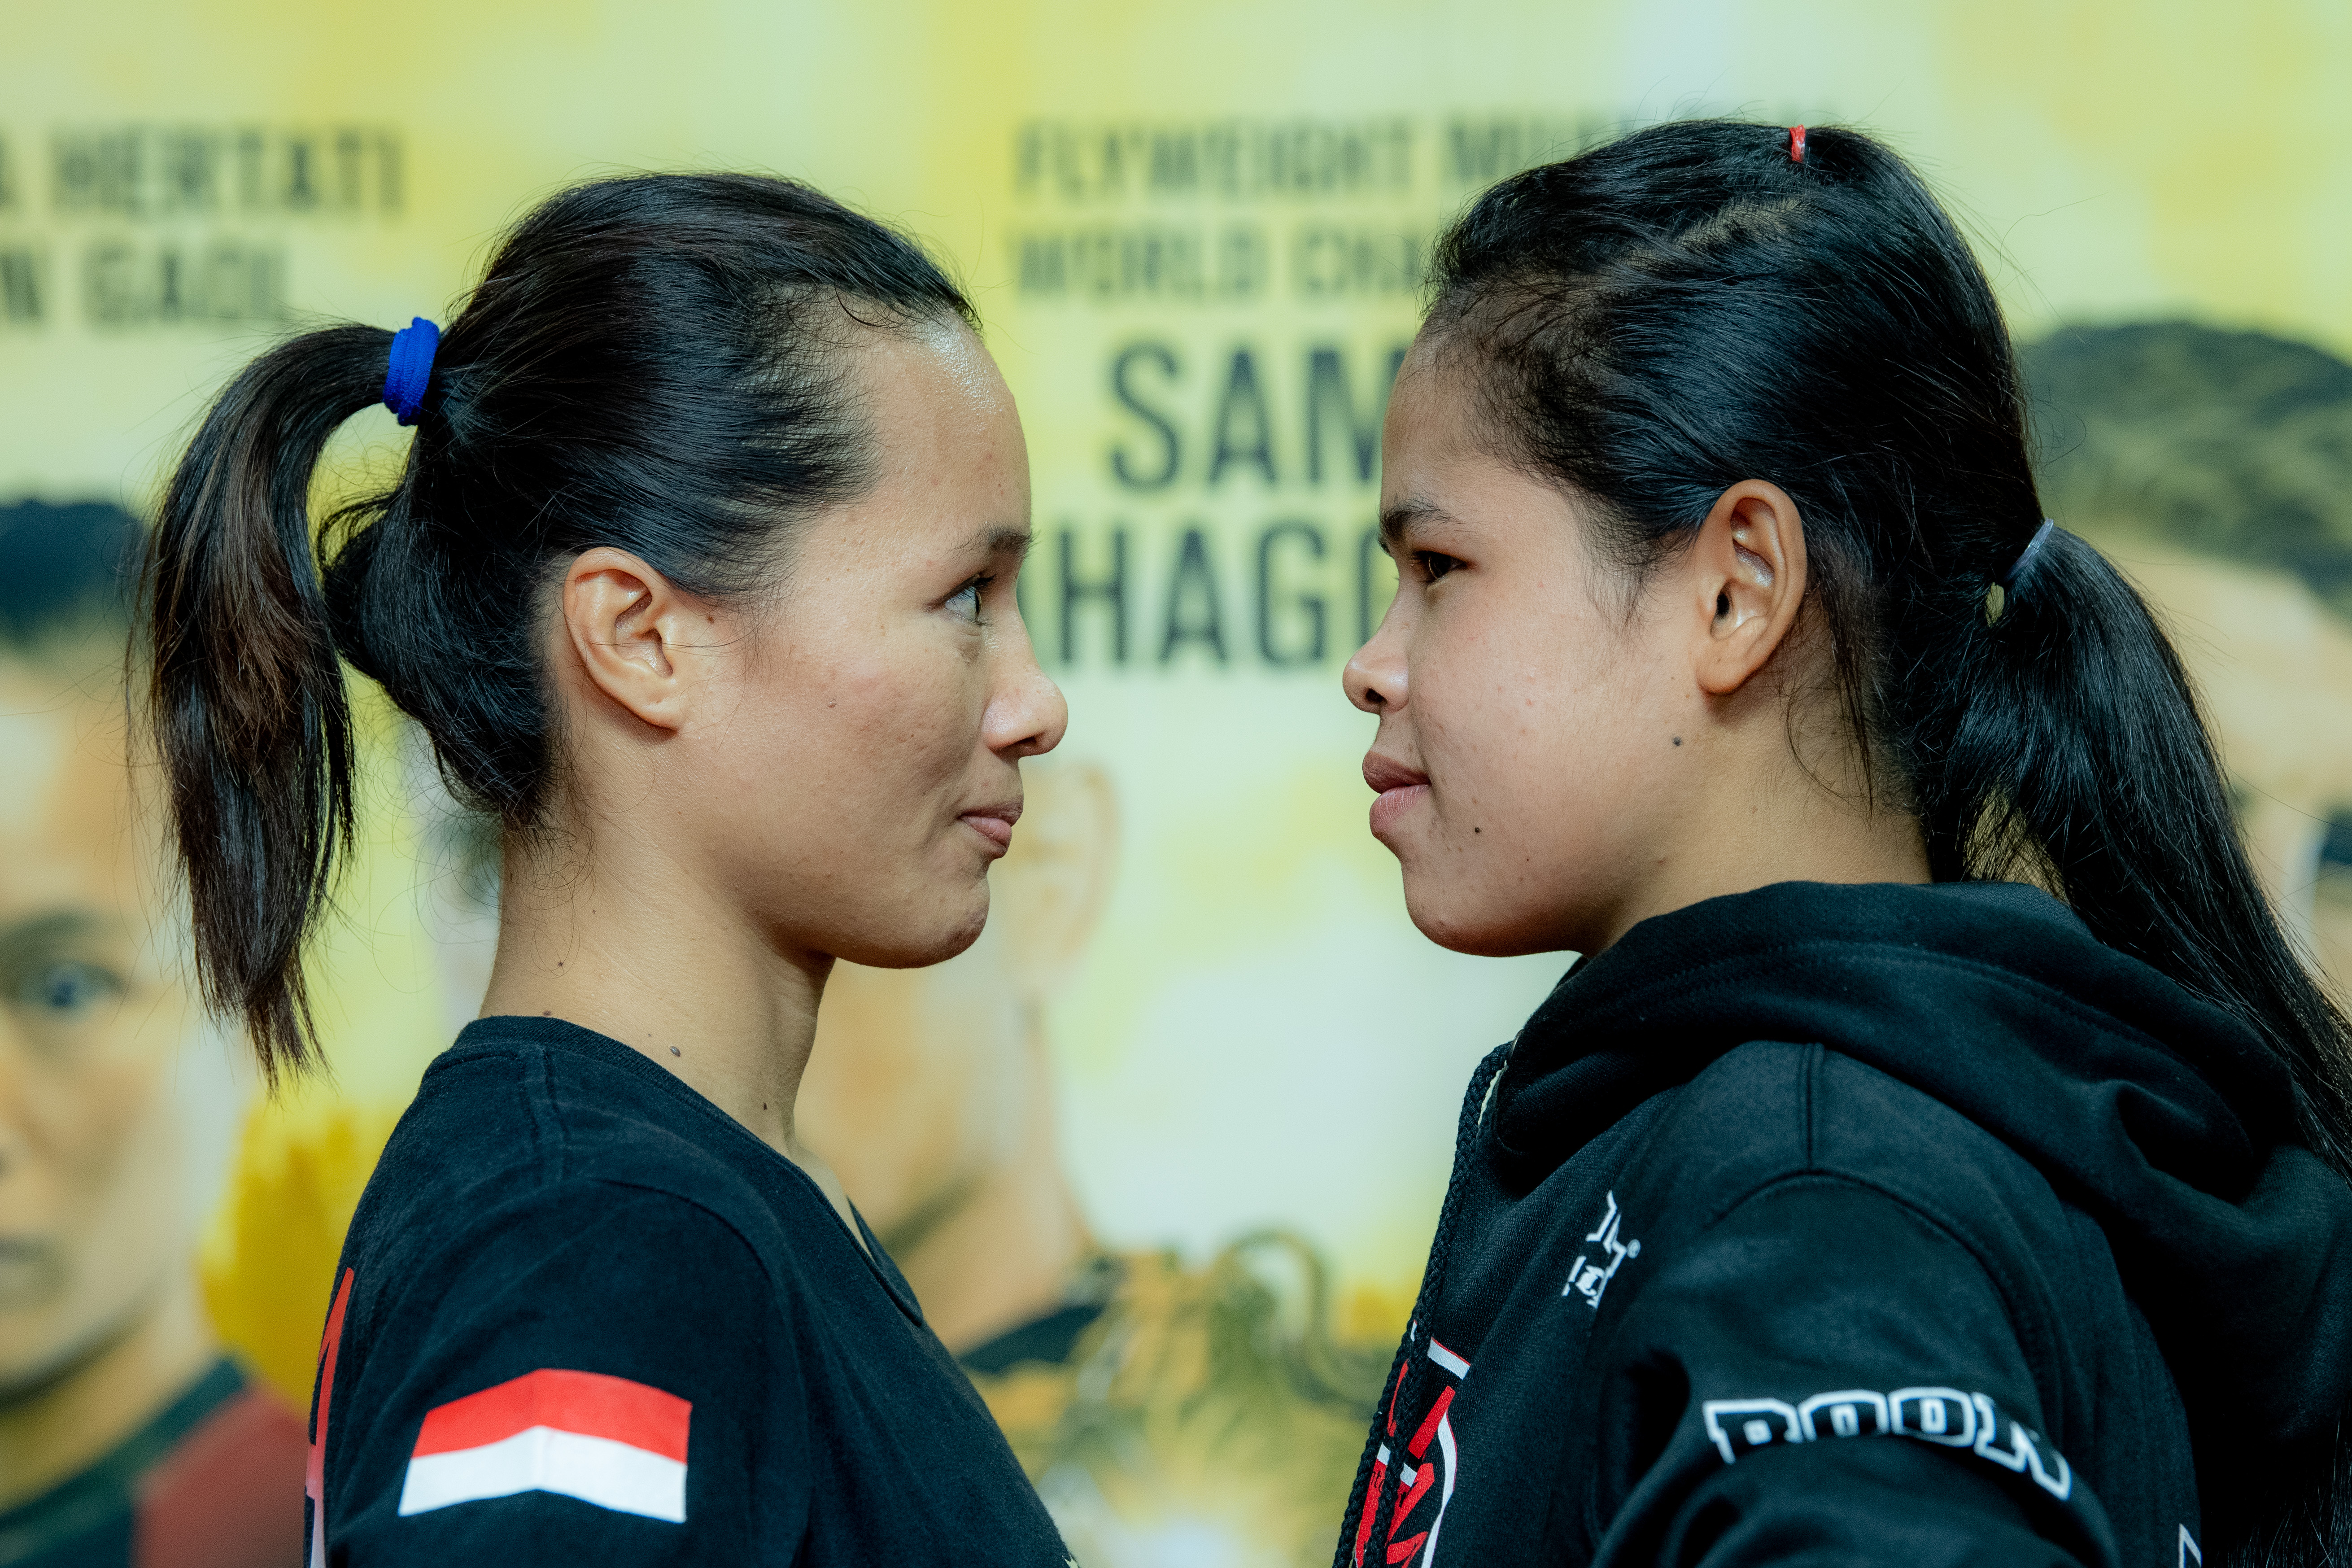 Siam Training Camp's Priscilla Hertati Lumban Gaol earns 6th ONE Championship win at 'ONE: For Honor' in Jakarta, Indonesia